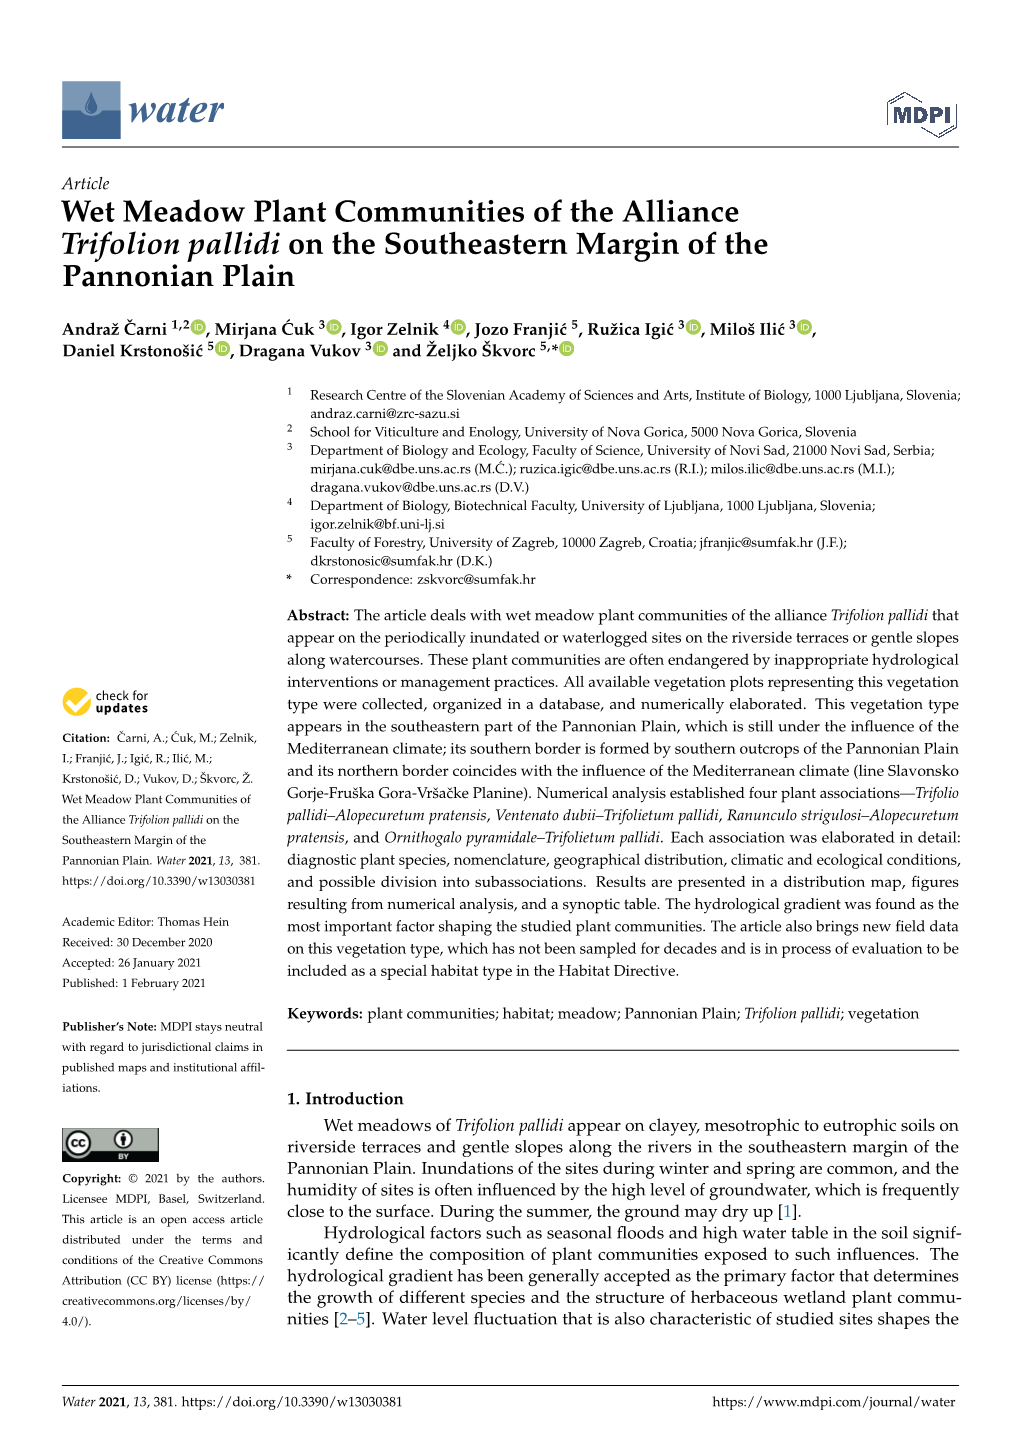 Wet Meadow Plant Communities of the Alliance Trifolion Pallidi on the Southeastern Margin of the Pannonian Plain